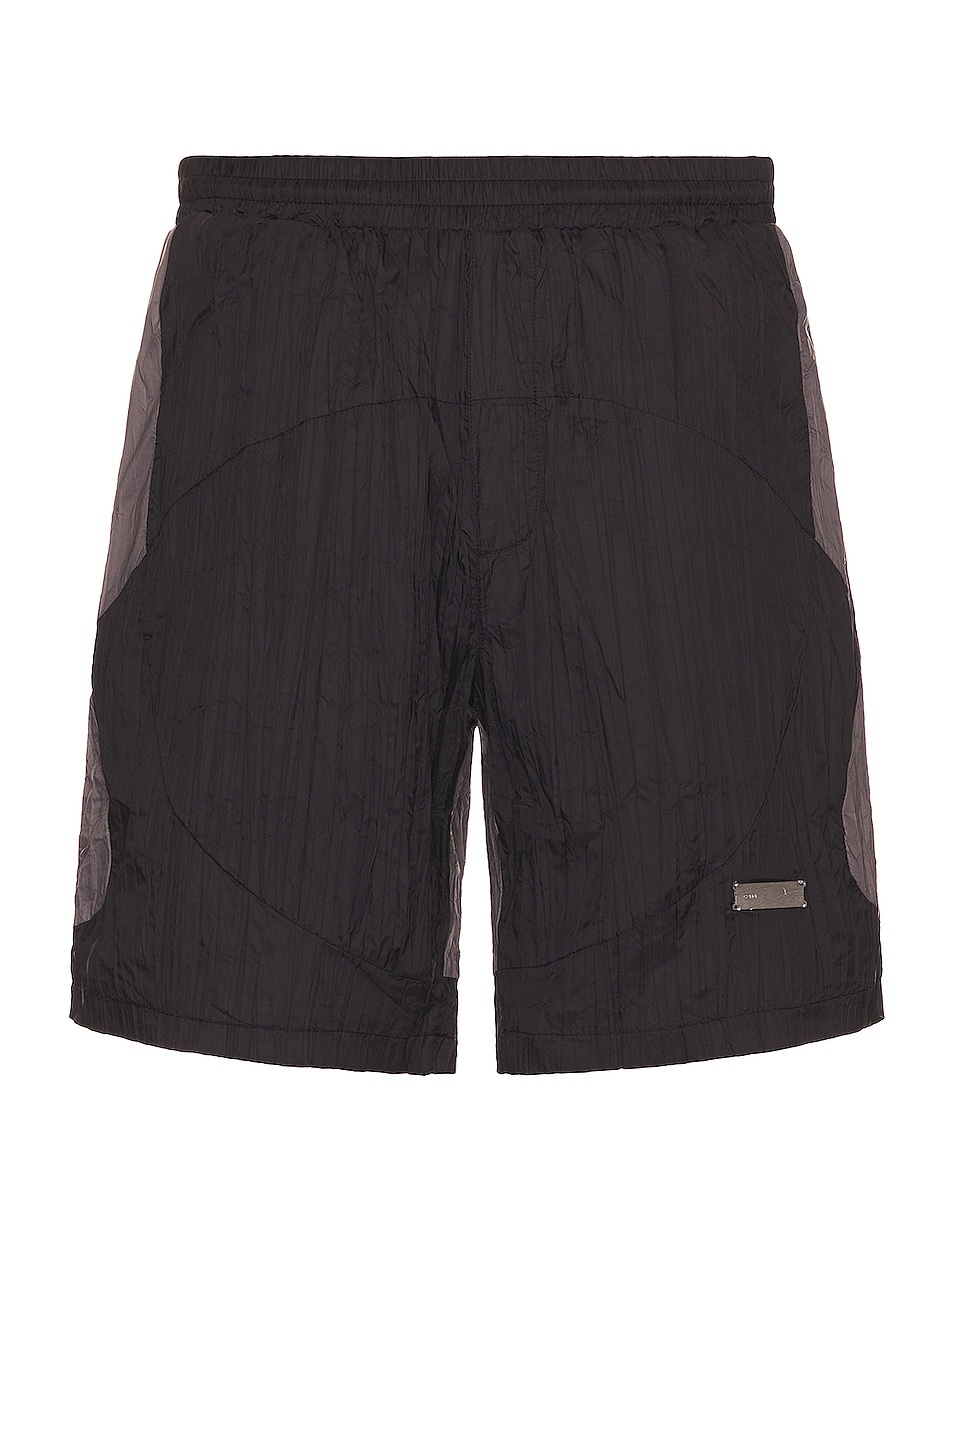 Image 1 of C2H4 Wrinkled Nylon Arch Panelled Track Shorts in Black & Gray